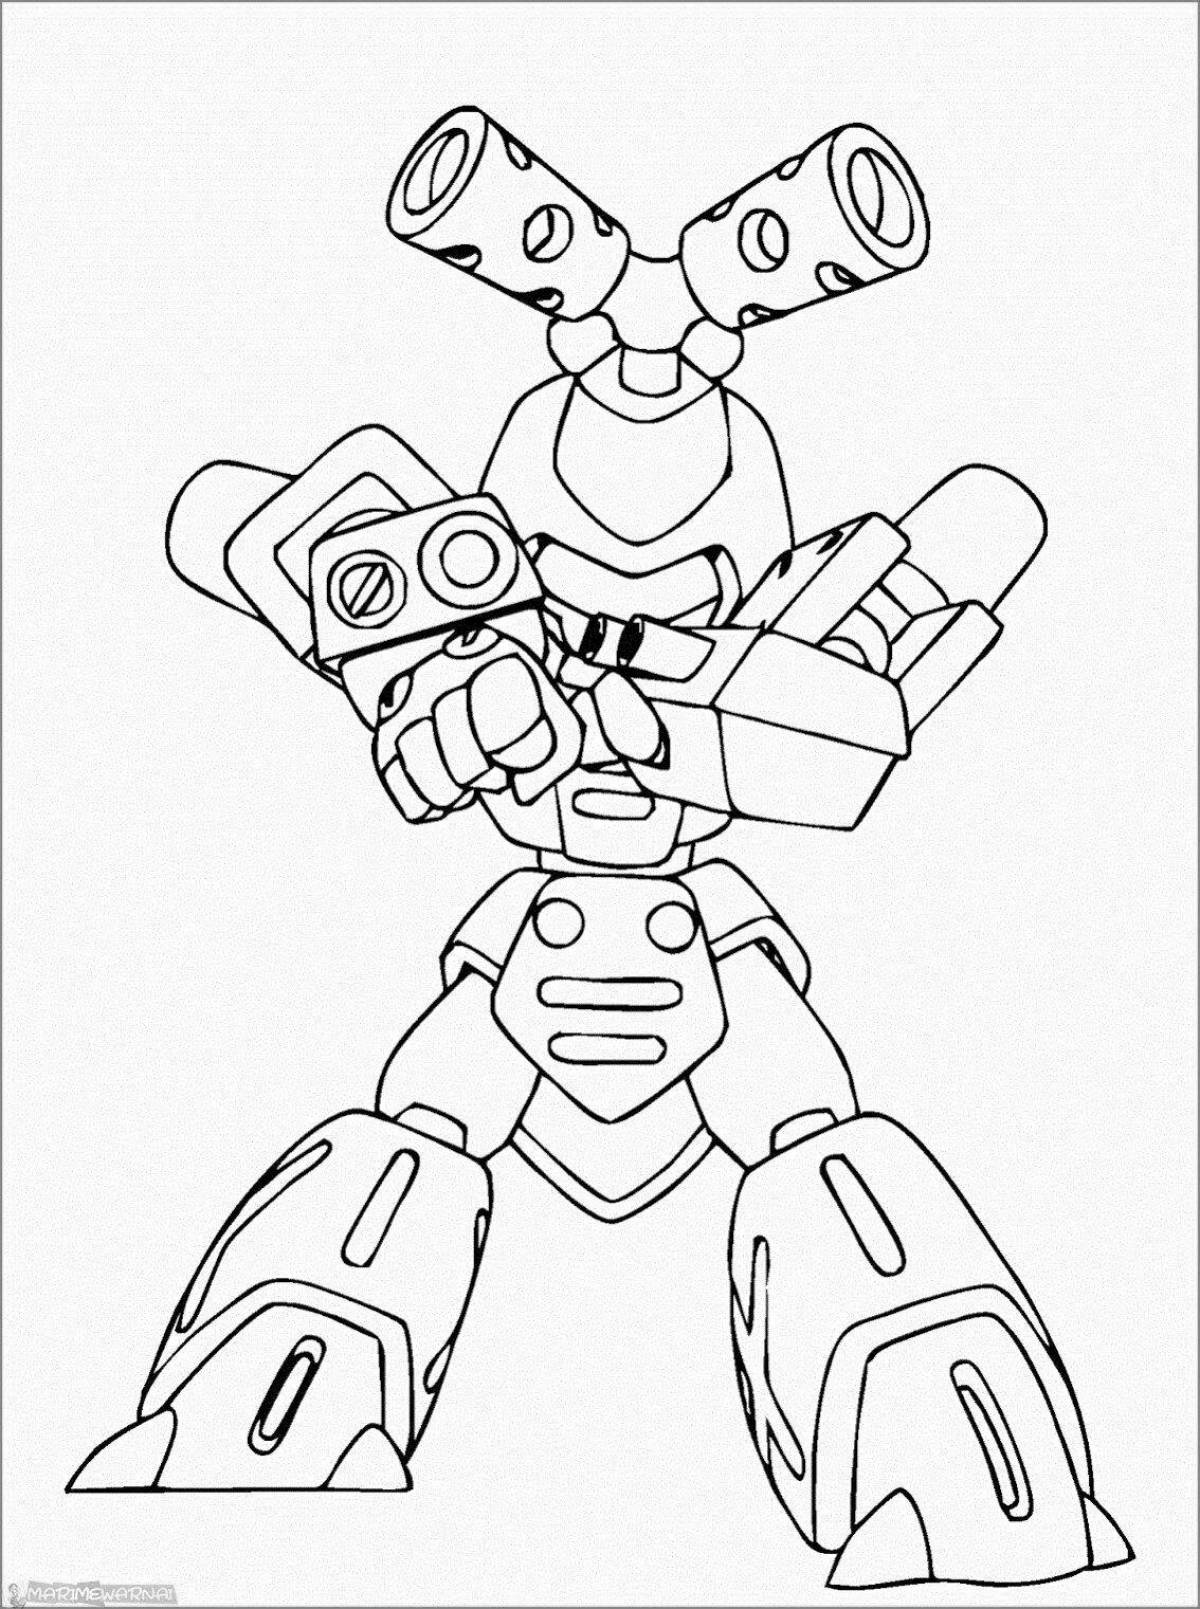 Great tobots and athlones coloring pages